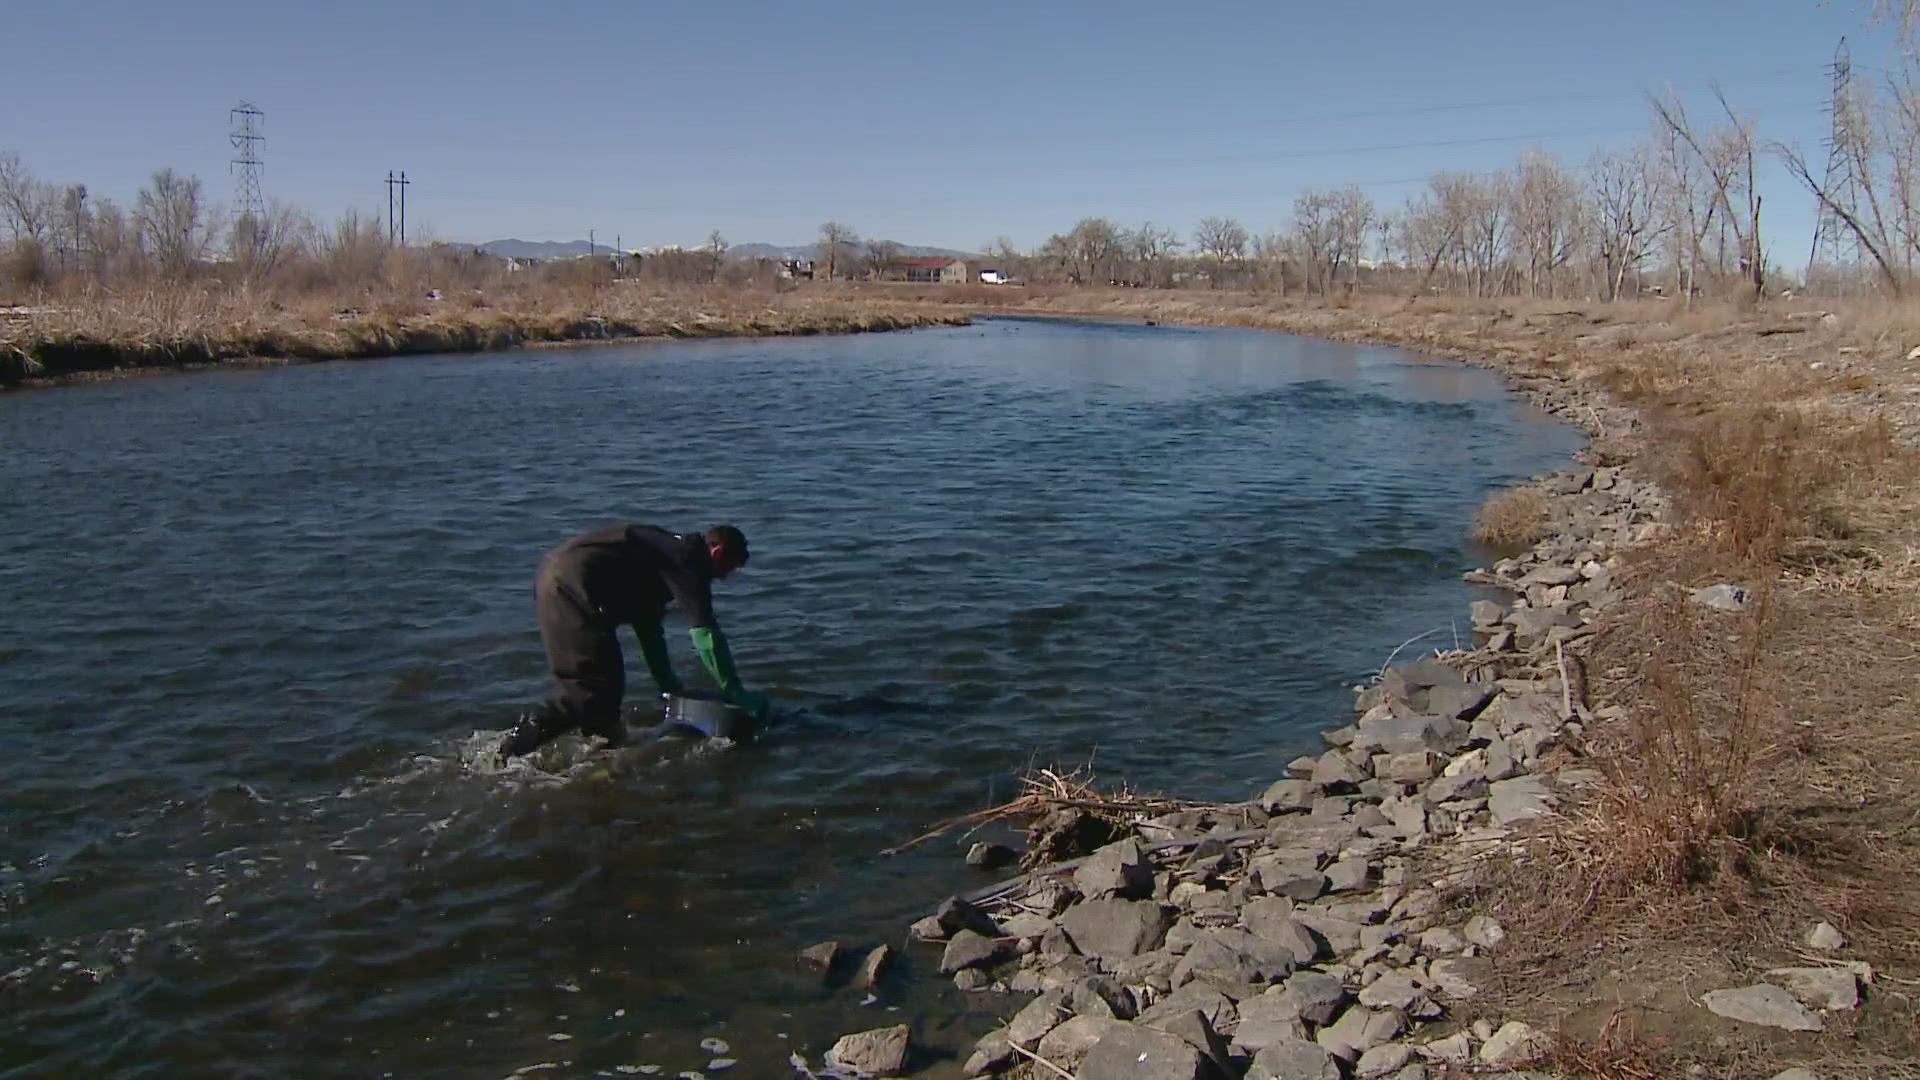 9NEWS reporter Courtney Yuen shows us what Metro Water Recovery did to help aquatic life in the river, thrive again.